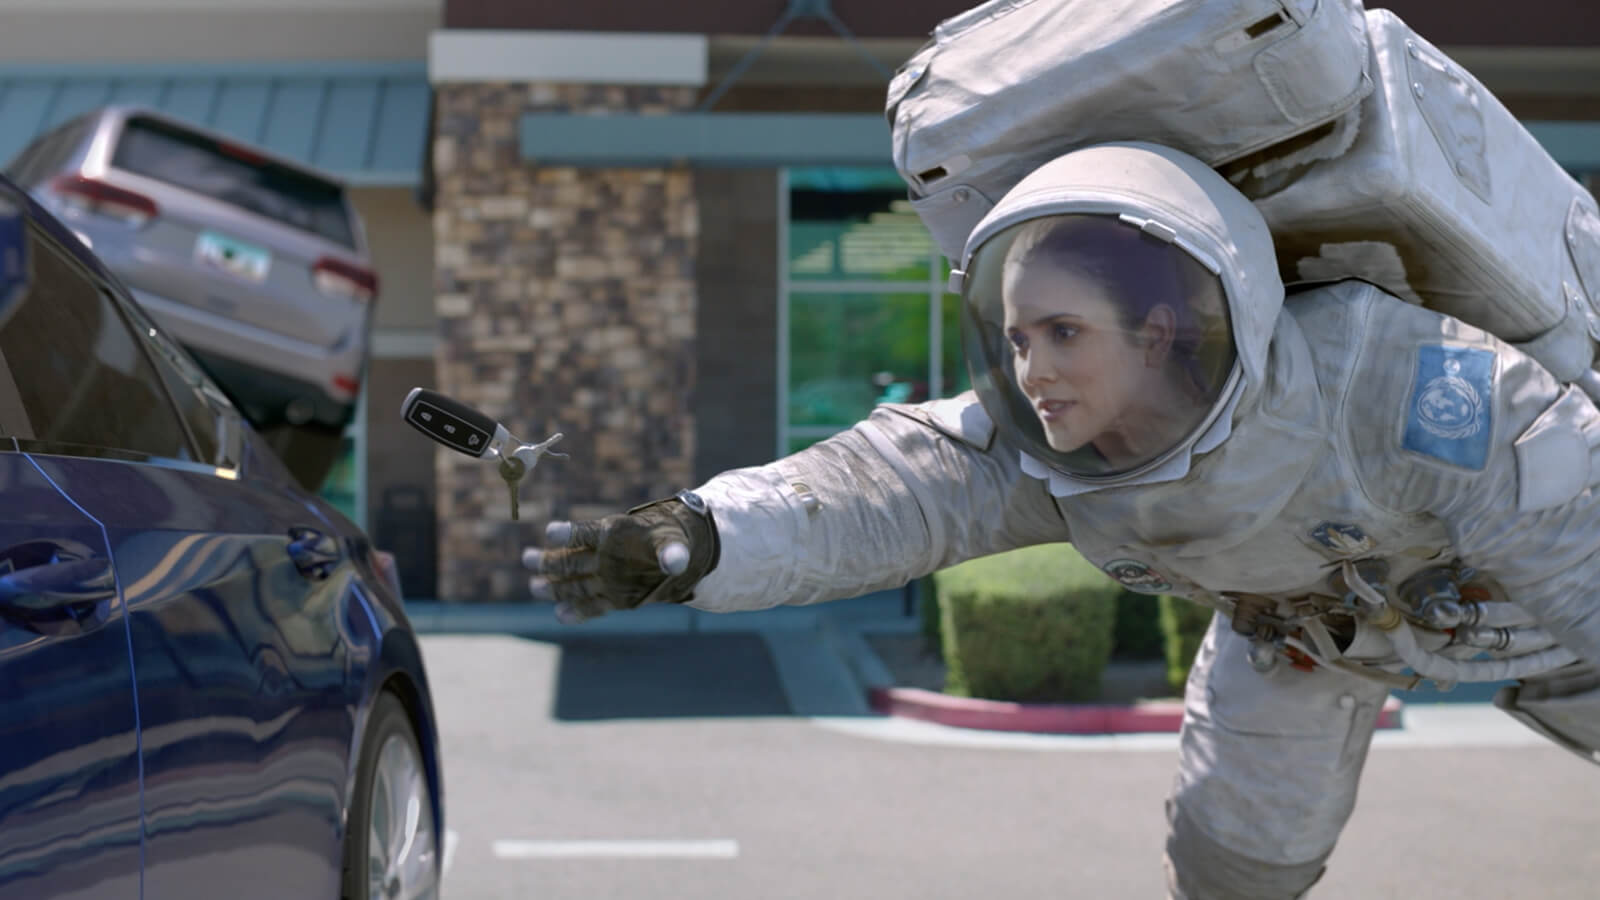 Image of Goodwill astronaut commercial